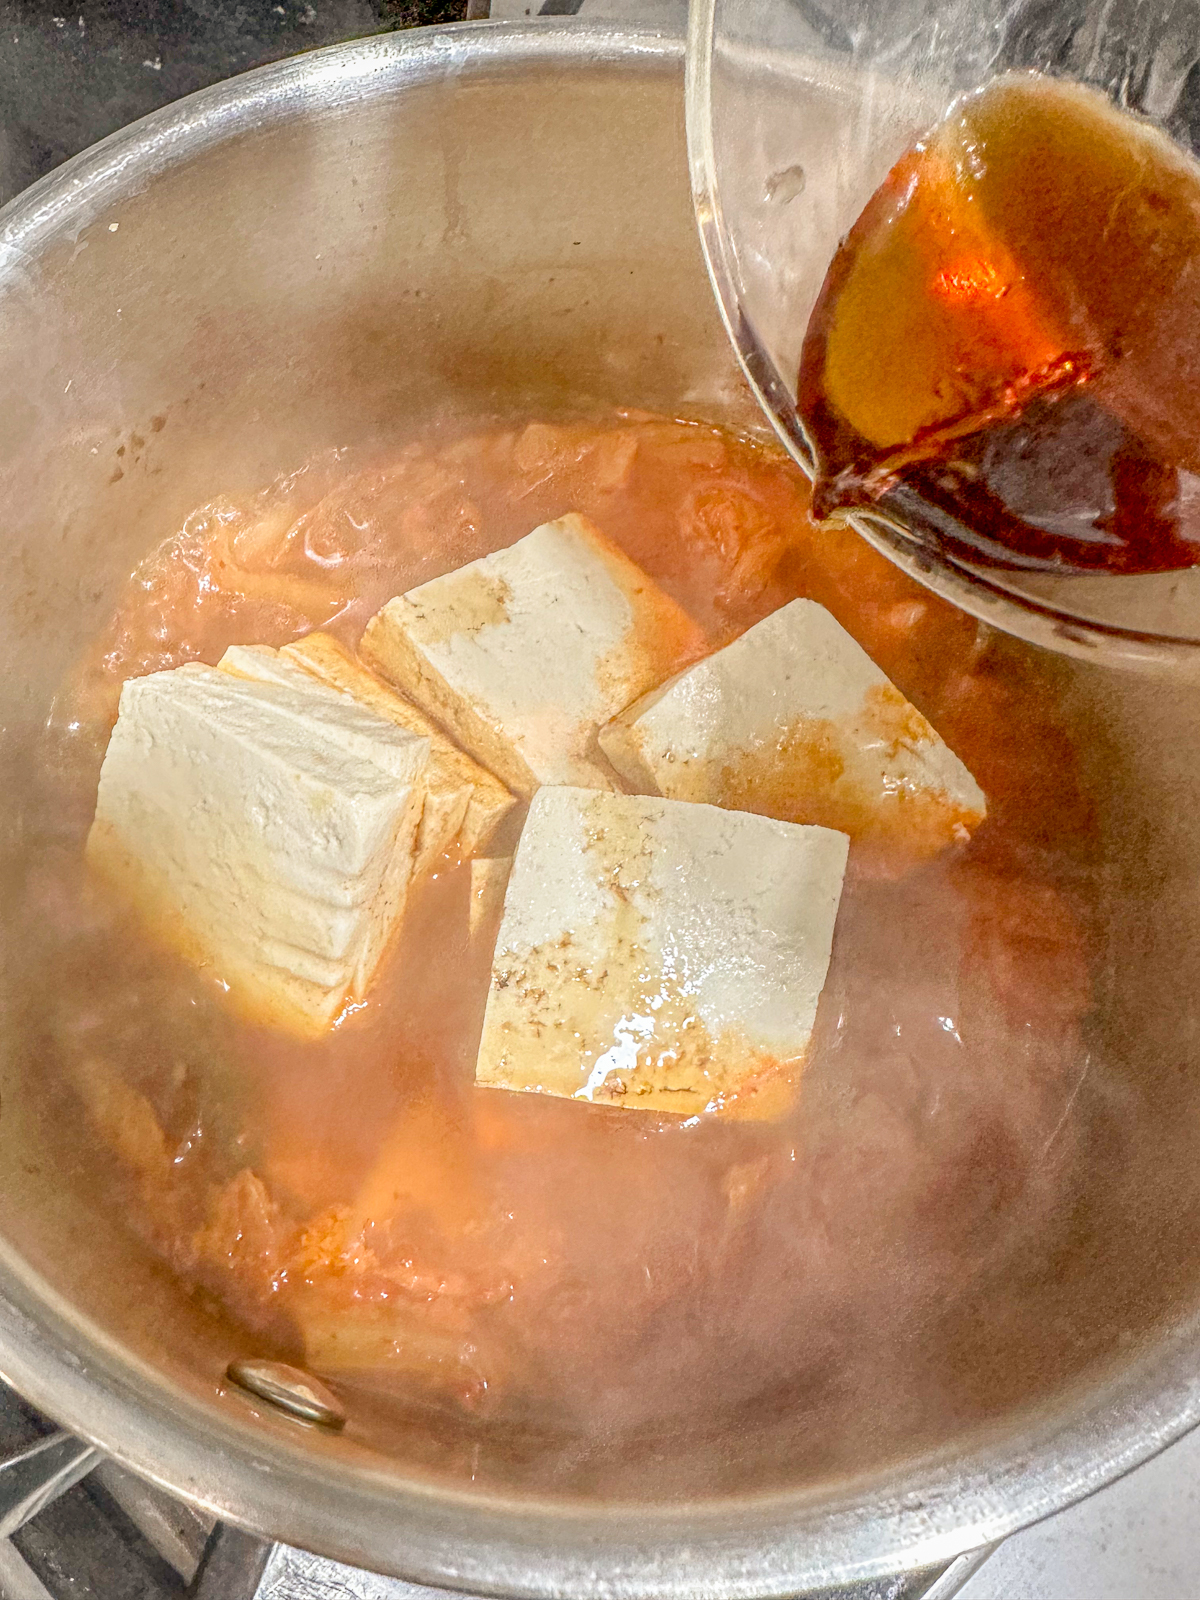 Adding soy sauce to a pot of boiling tofu, kimchi and broth.